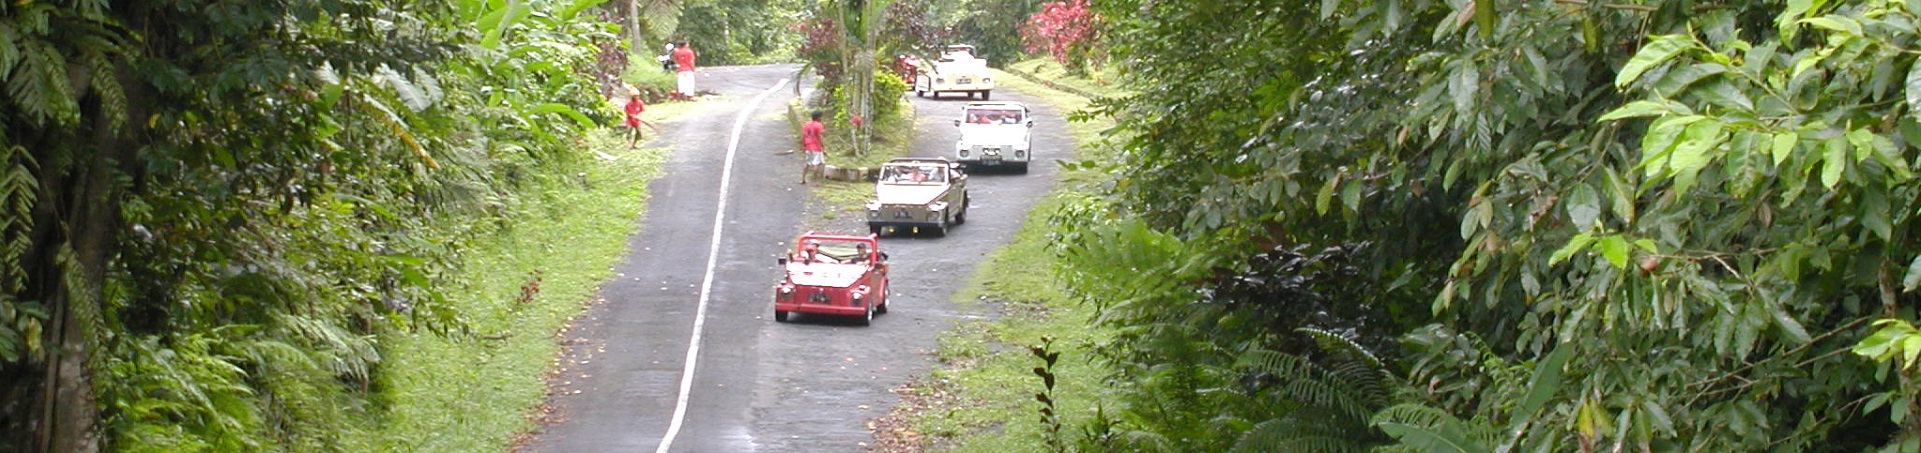 Image of Exploring Bali by VW Convertible - West Bali